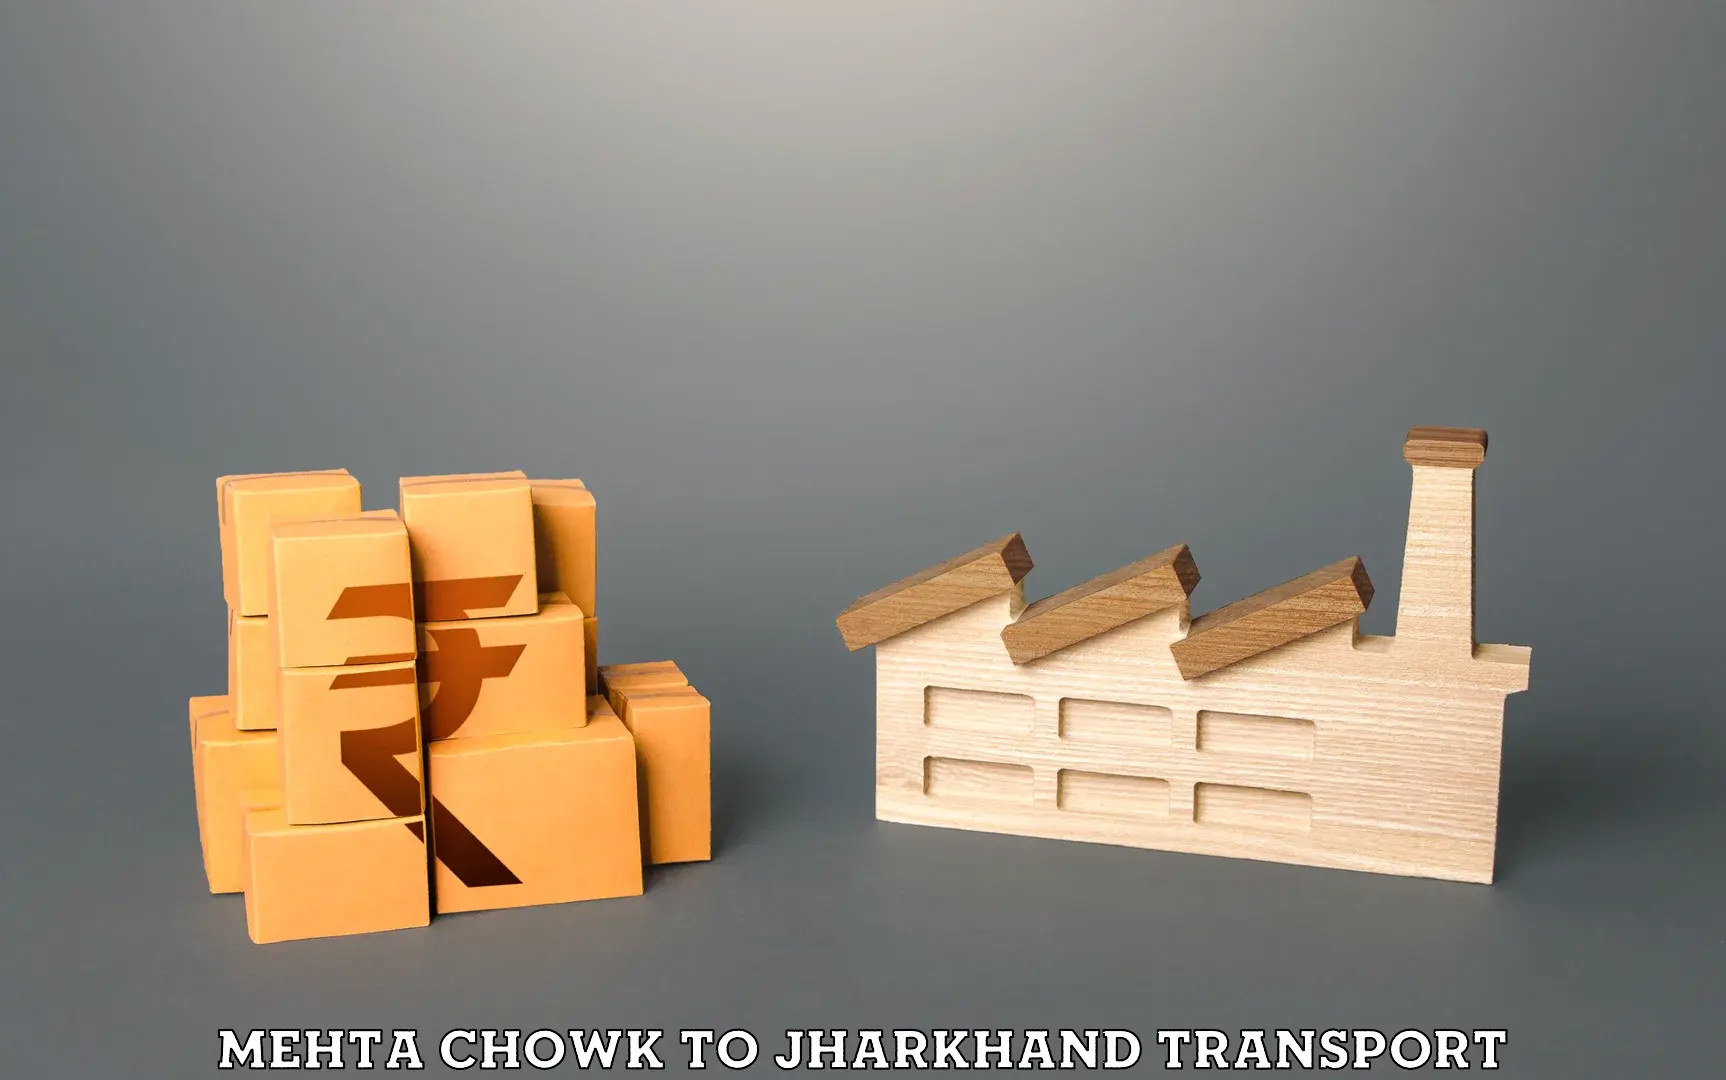 Container transport service Mehta Chowk to Jharkhand